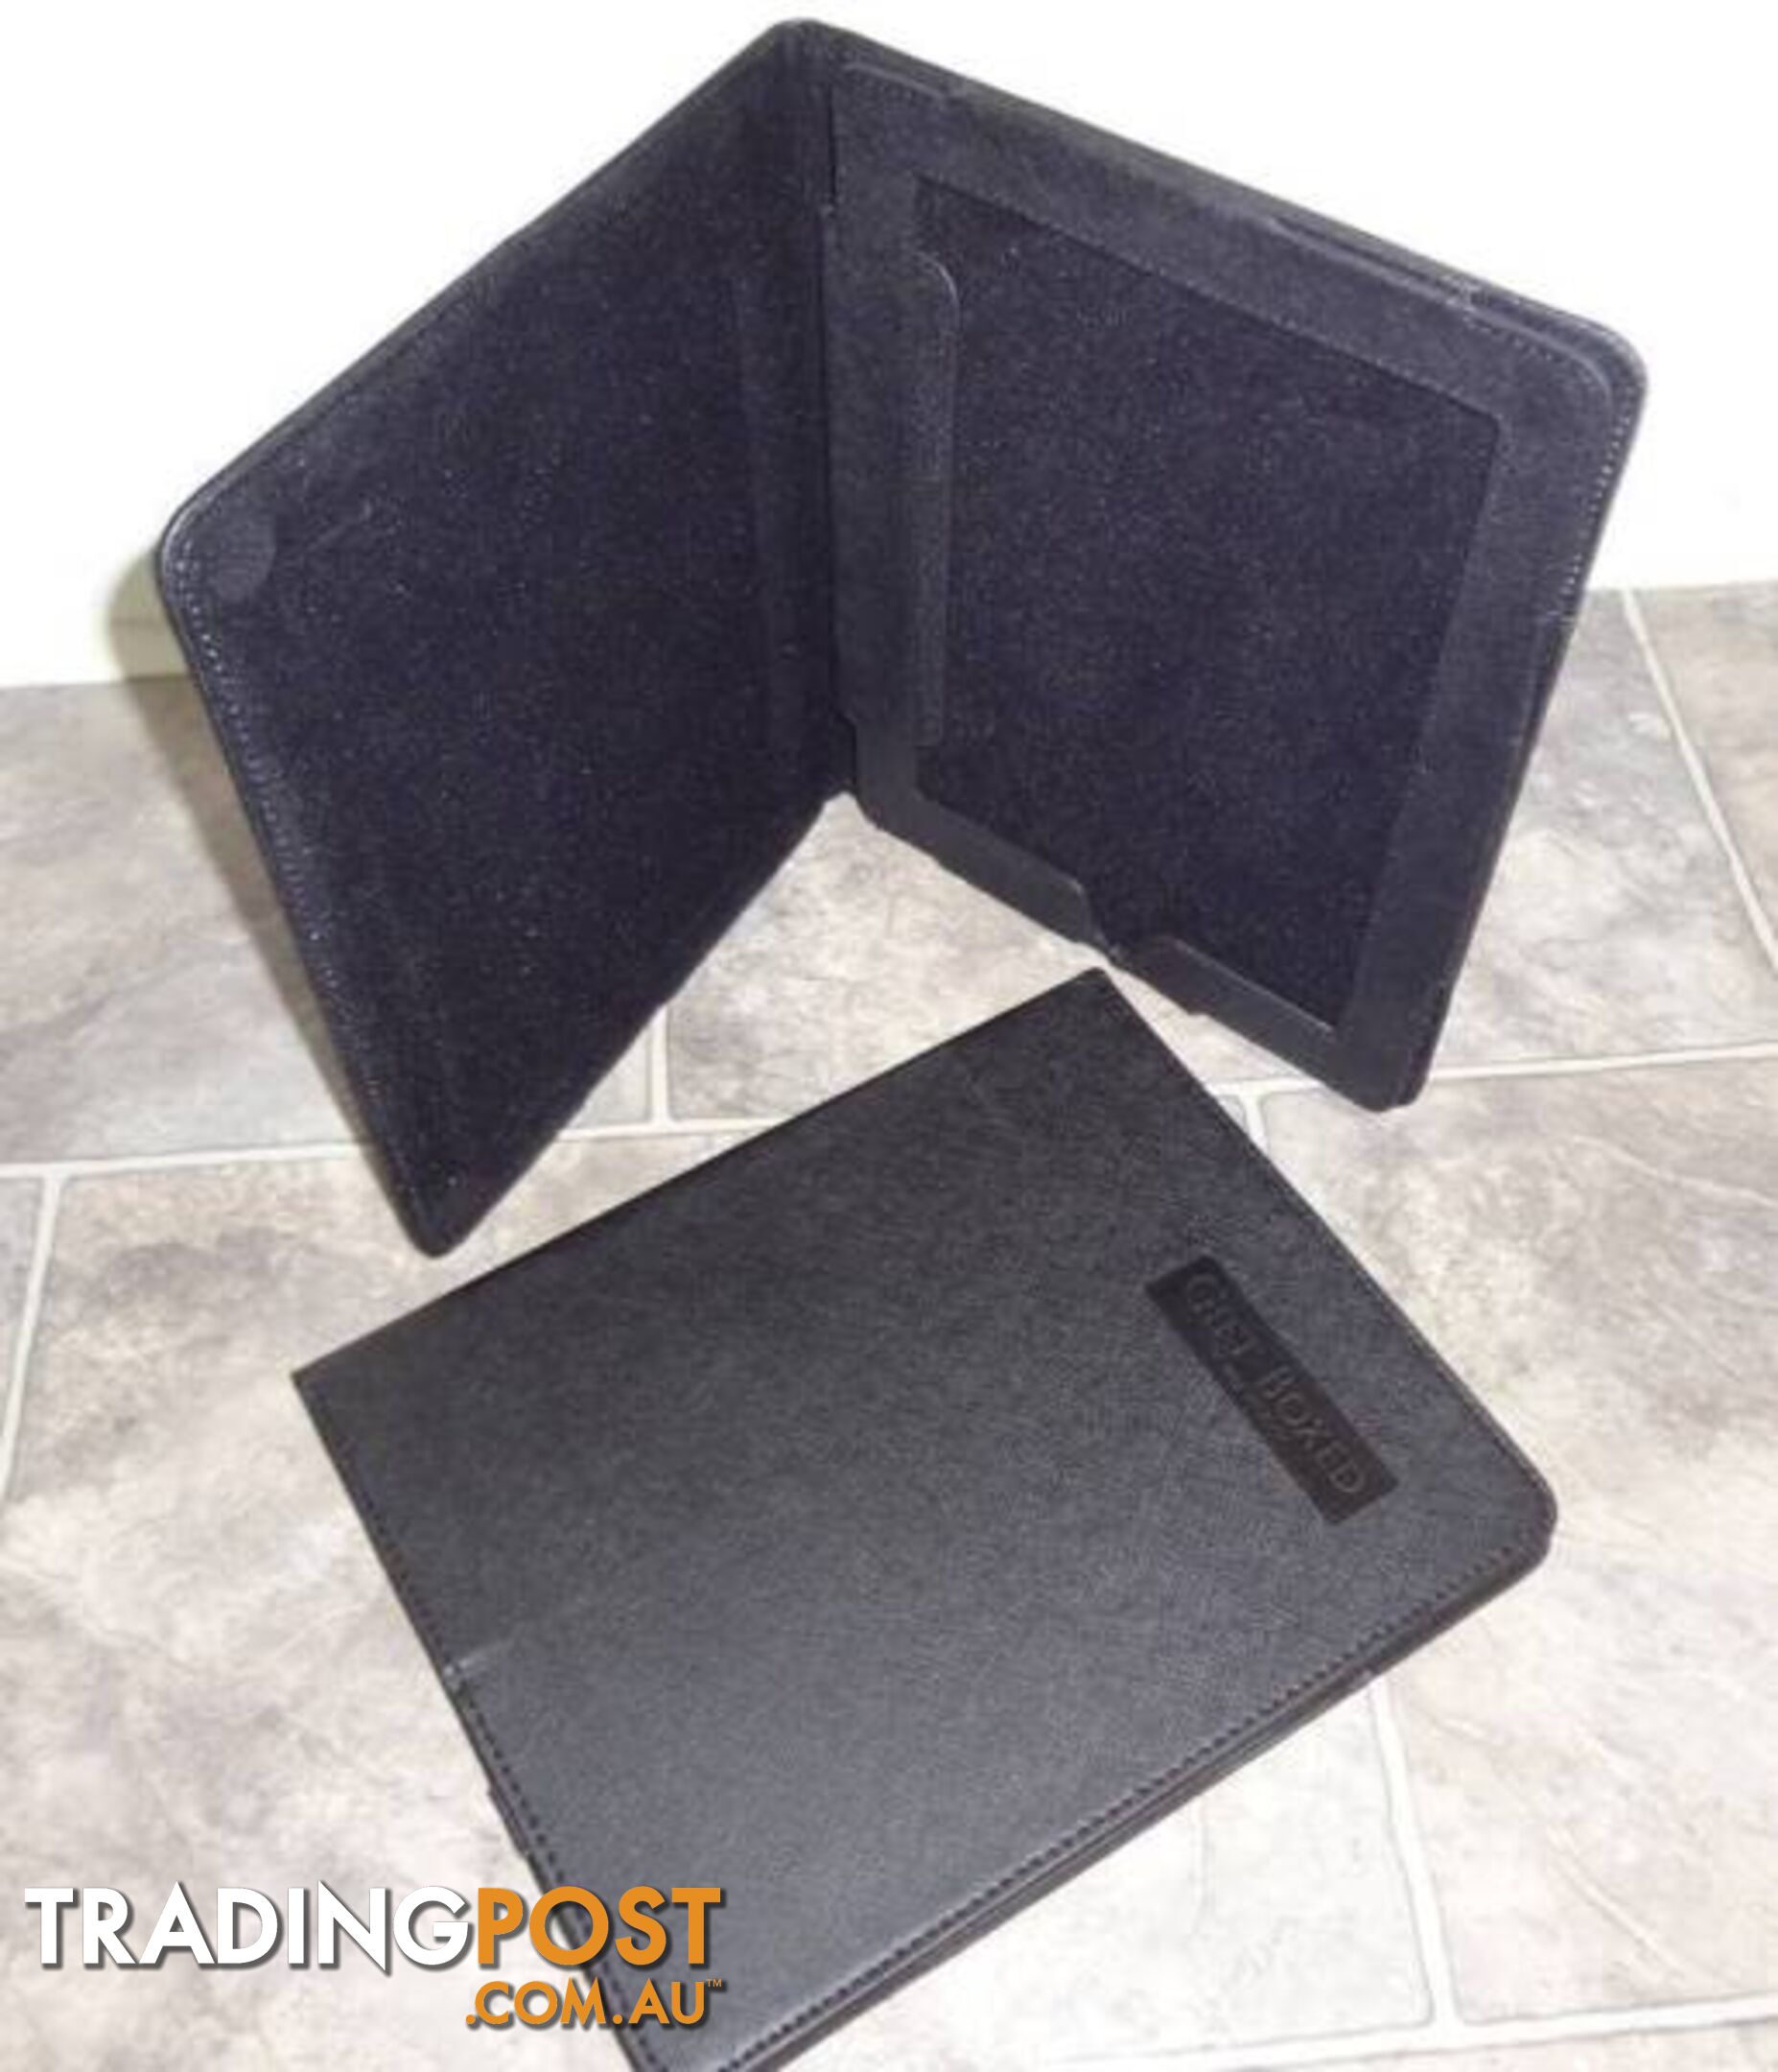 iPAD LEATHER COVER (new)